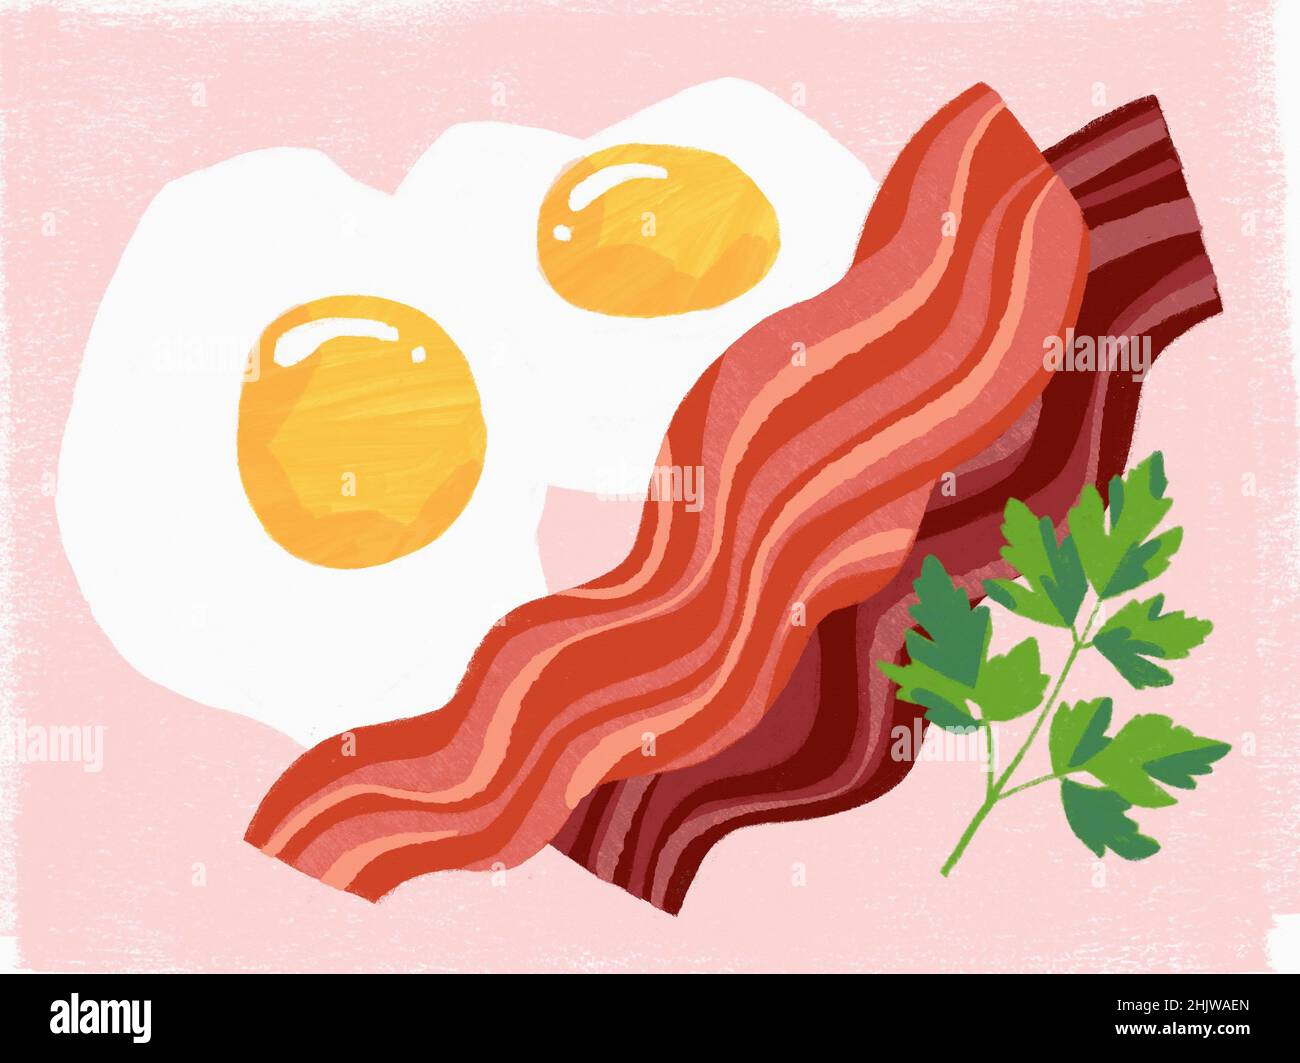 Bacon and eggs Stock Photo